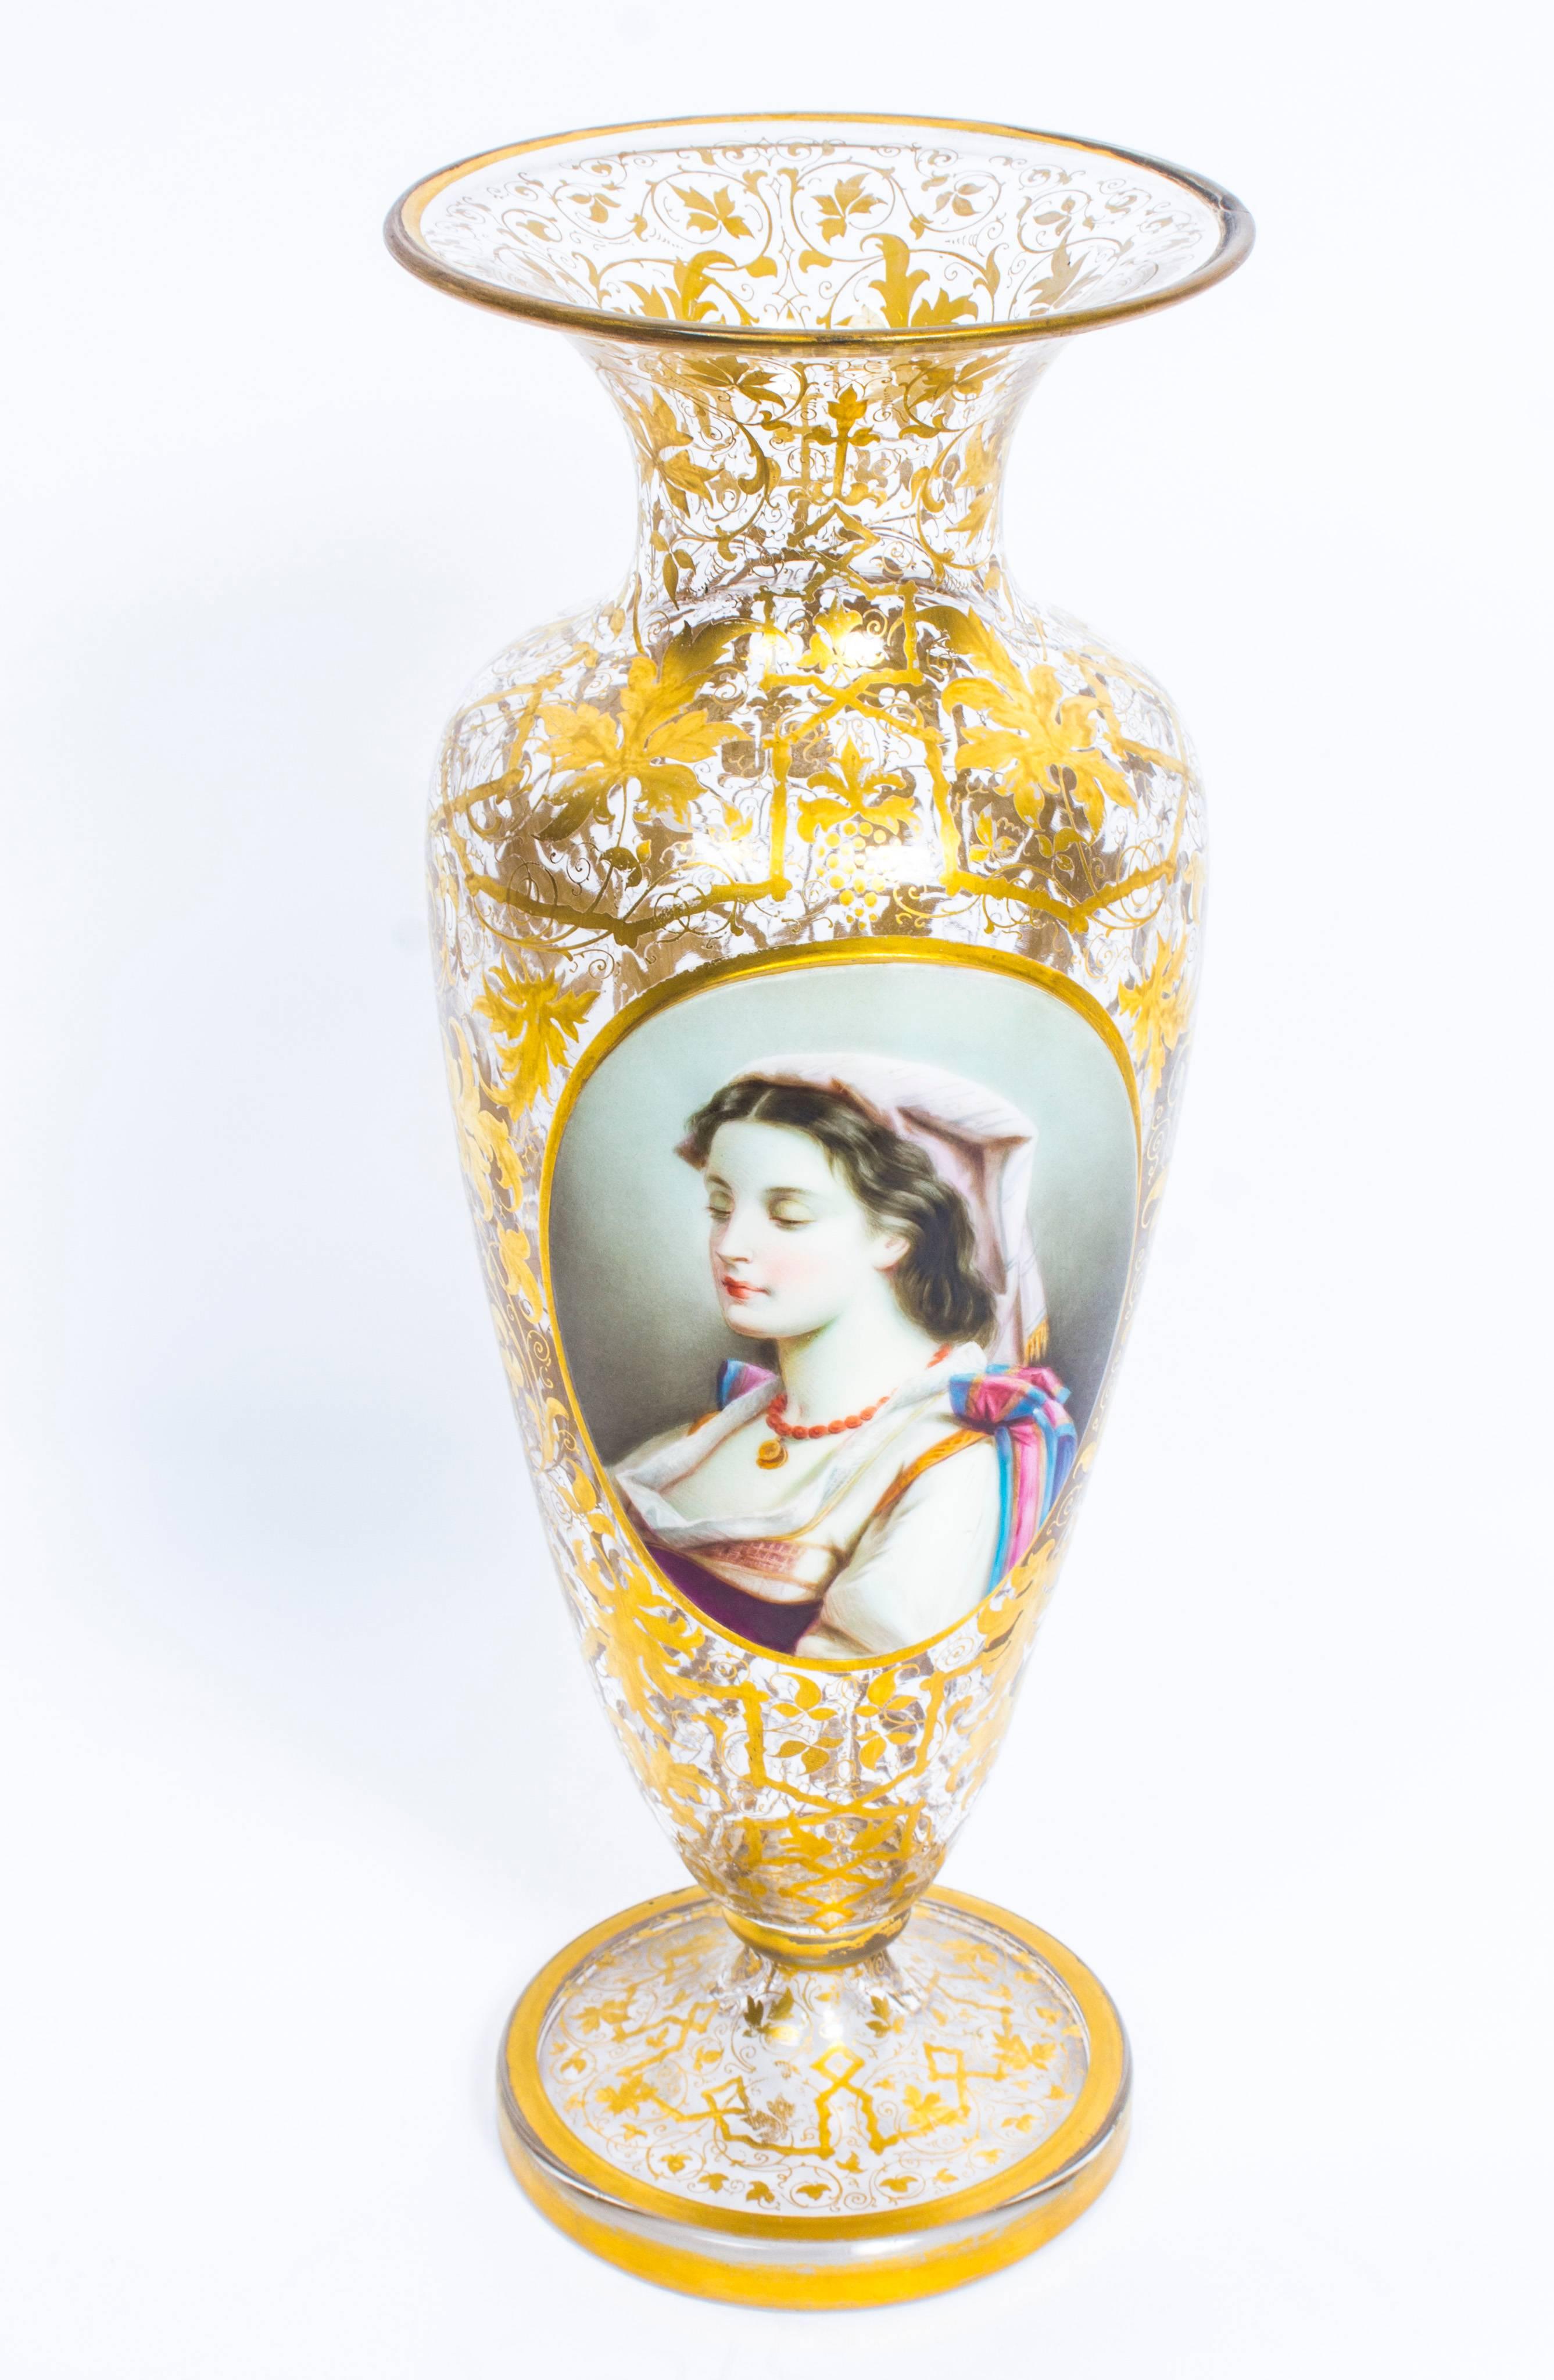 This is a stunning pair of late 19th century Bohemian opaline flashed and gilded crystal portrait vases.

The crystal vases are profusley decorated with exquisite foliate gilding, are of tapering baluster form with flared necks and raised on ring